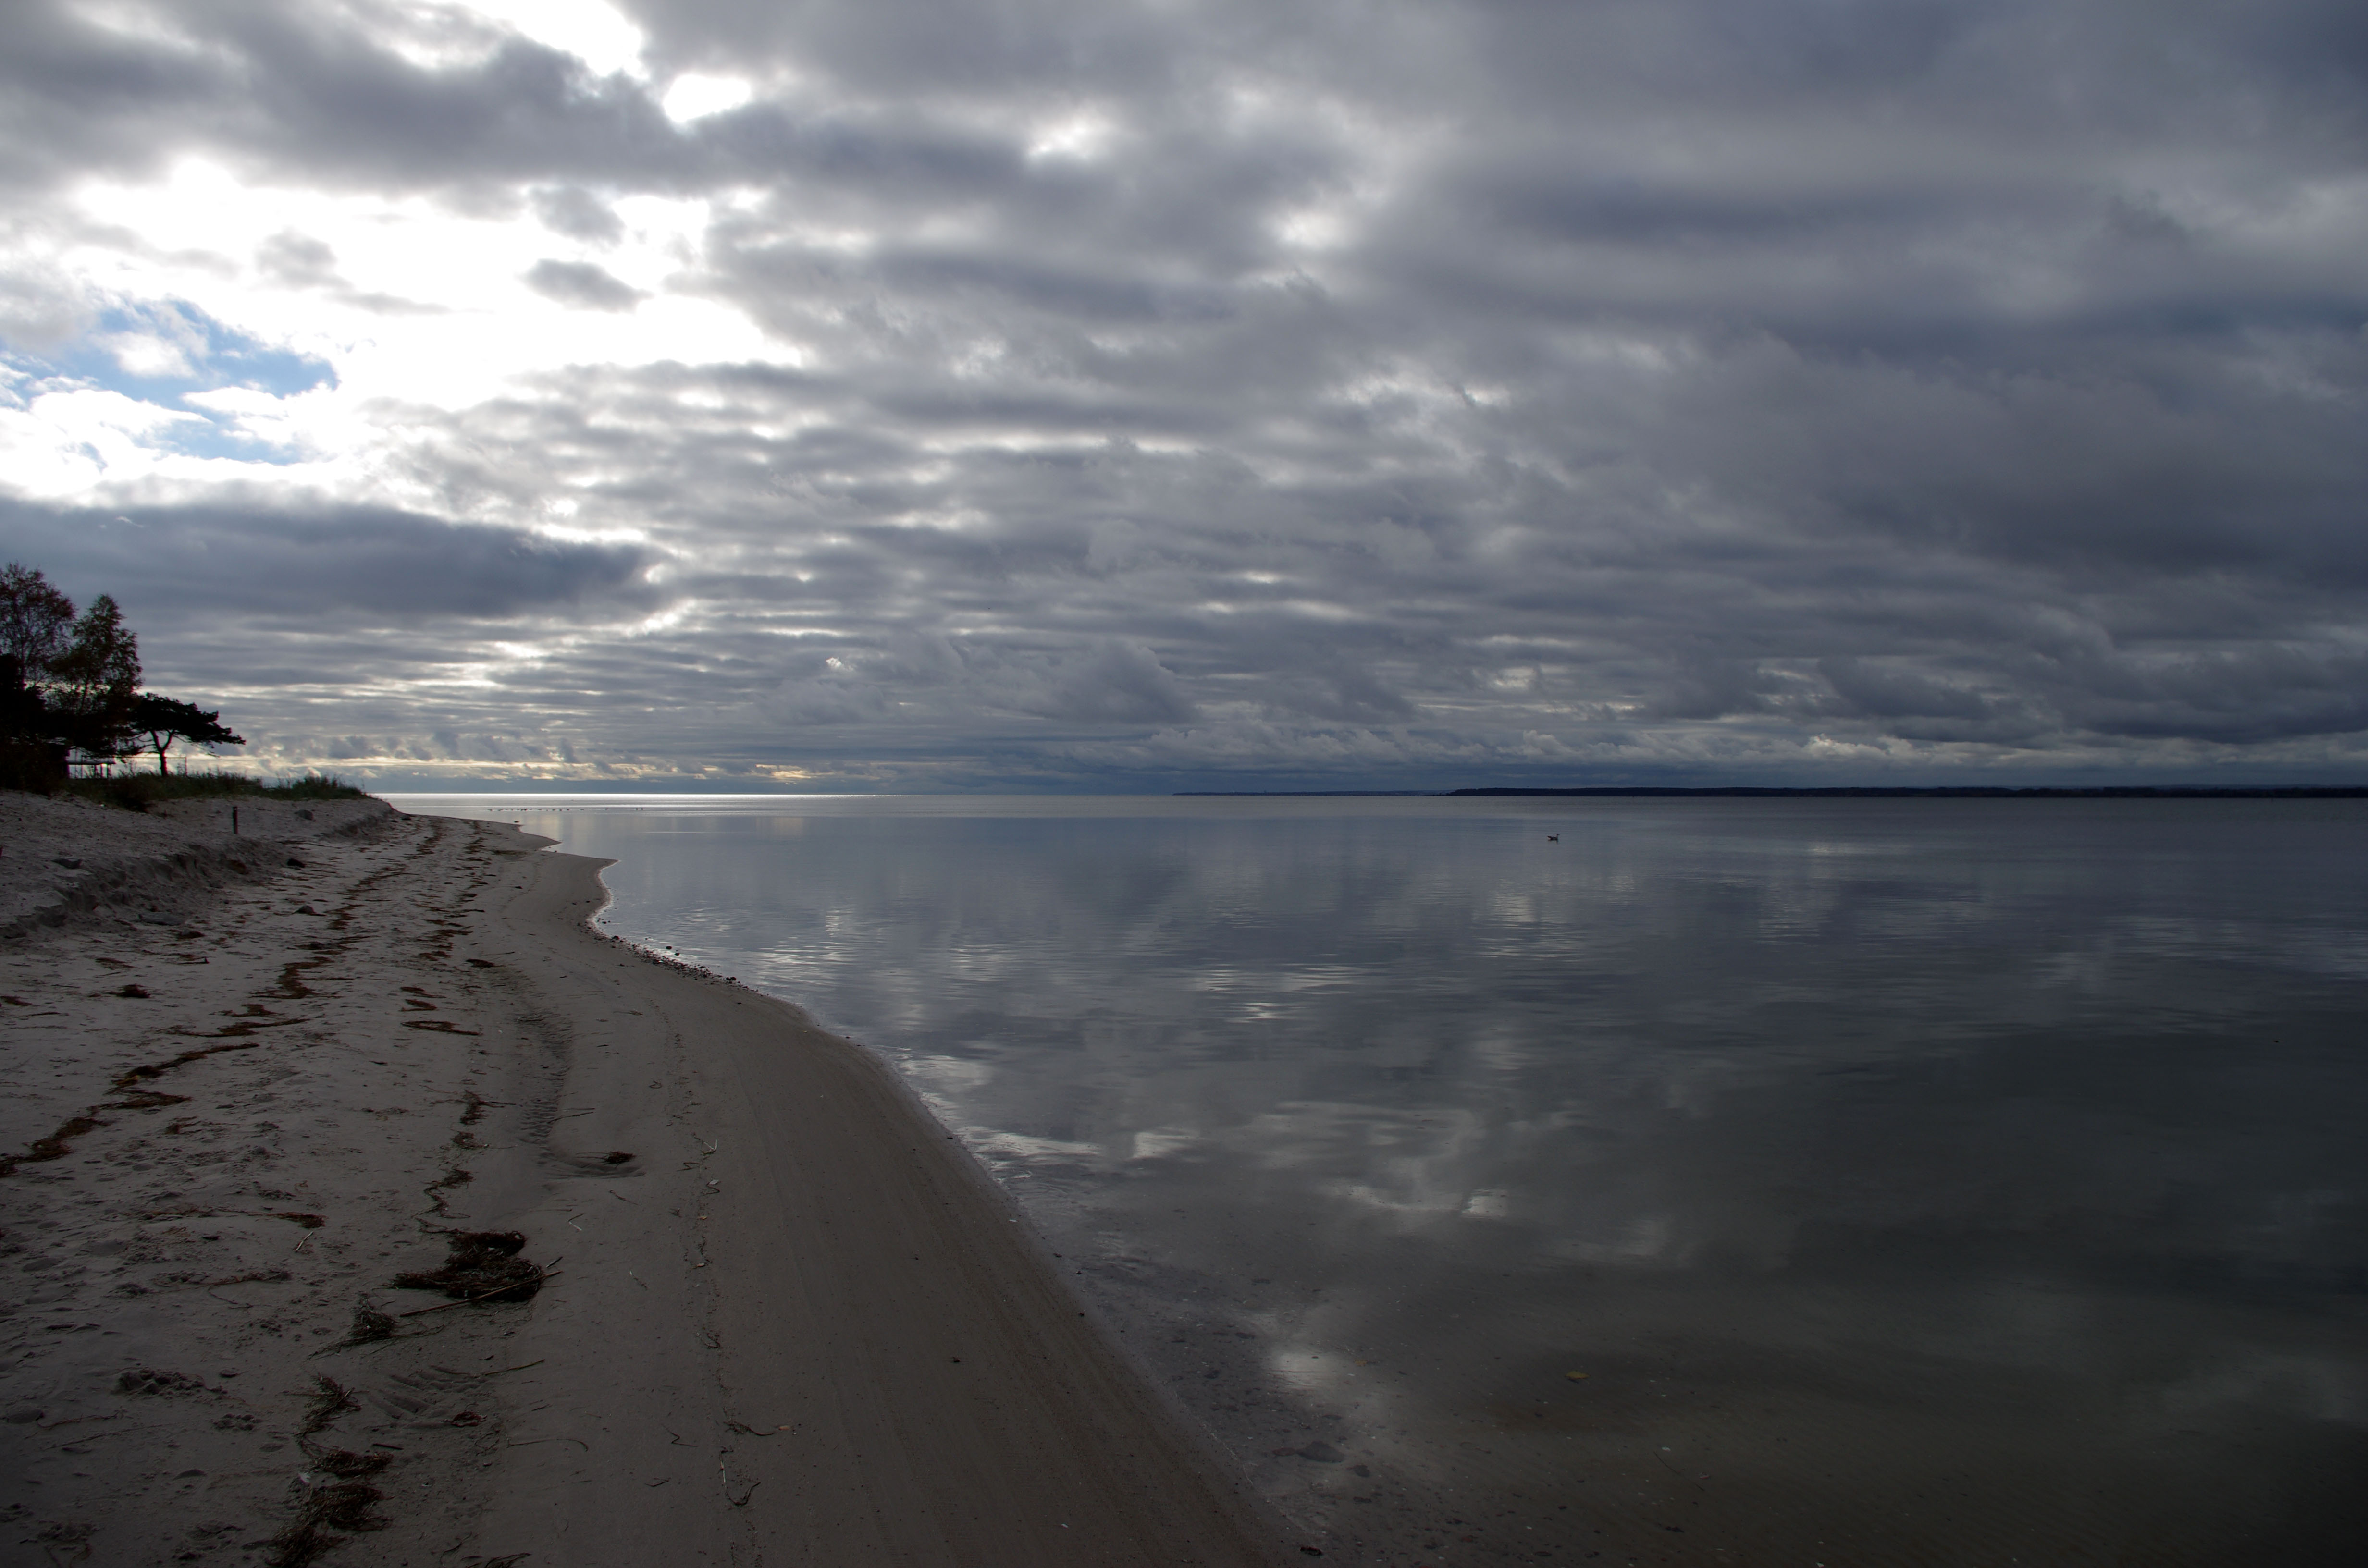 The photo shows a sandy beach bordering on a large shallow bay belonging to the Baltic Sea.